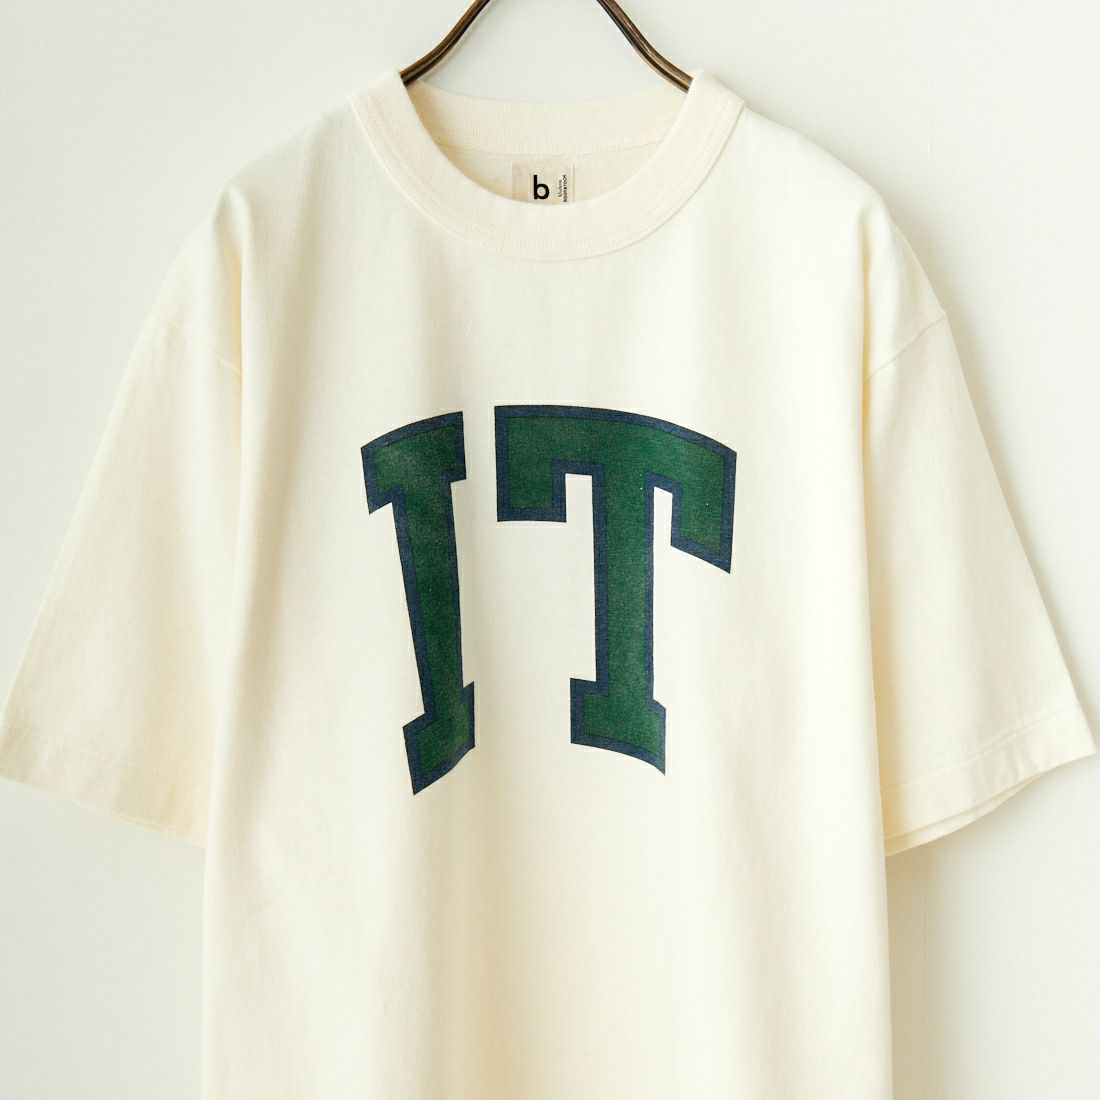 blurhms ROOTSTOCK [ブラームス ルーツストック] スタンダード プリントTシャツ [BROOTS24S26A] 01 IVORY